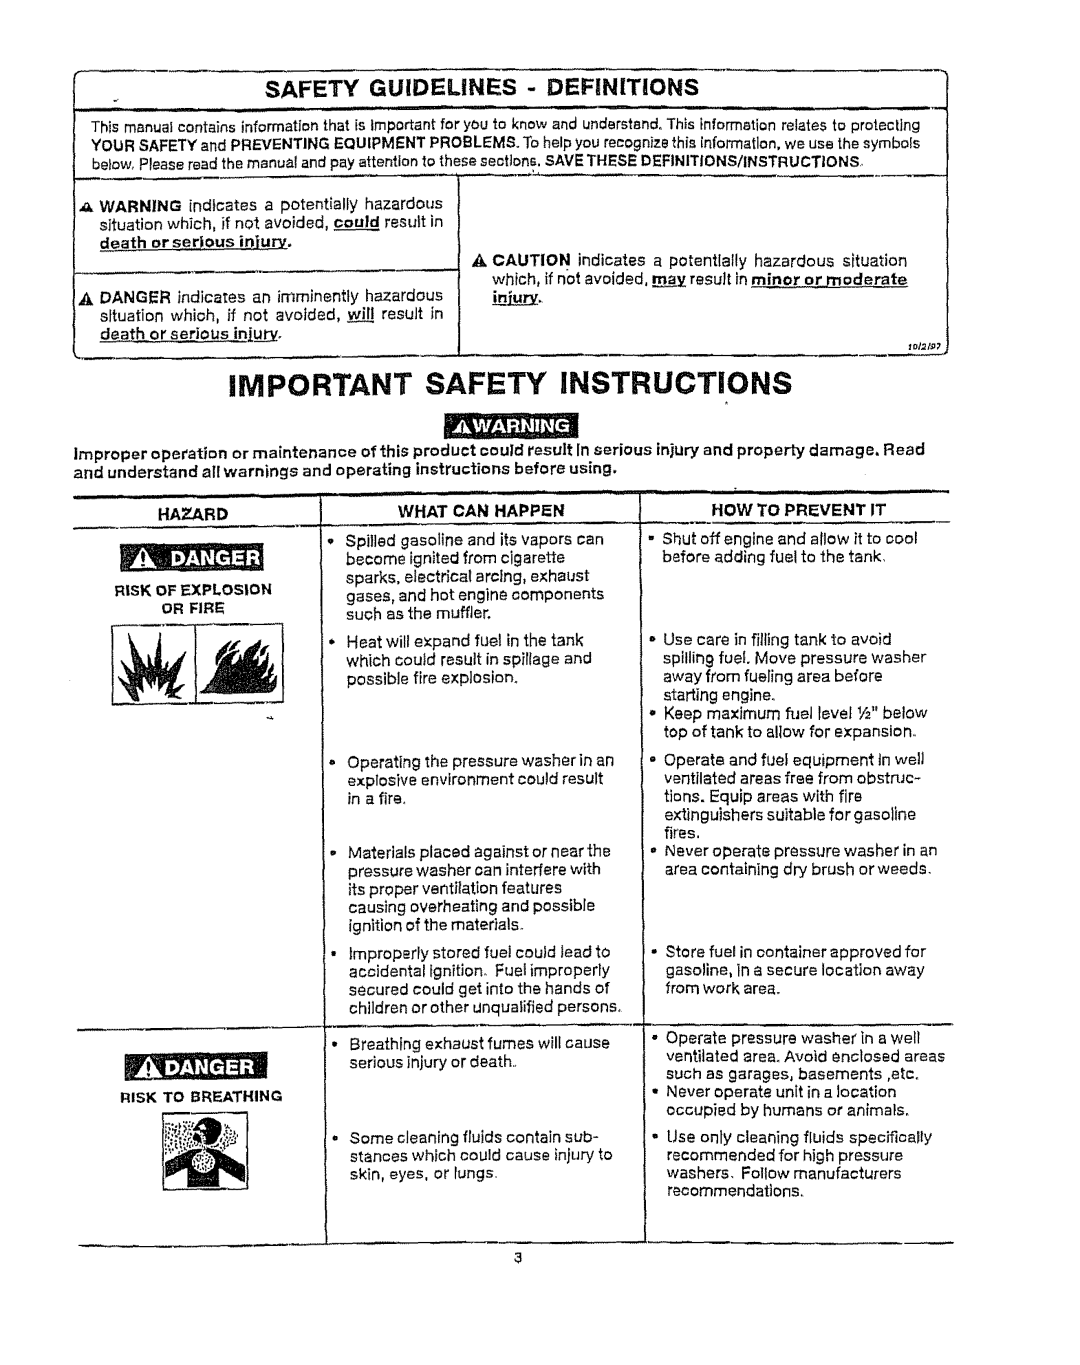 Craftsman 919.76902 Important Safety Instructions, Safety Guidelines - Definitions, death or,s,erous in,u__r_, i_u___ 